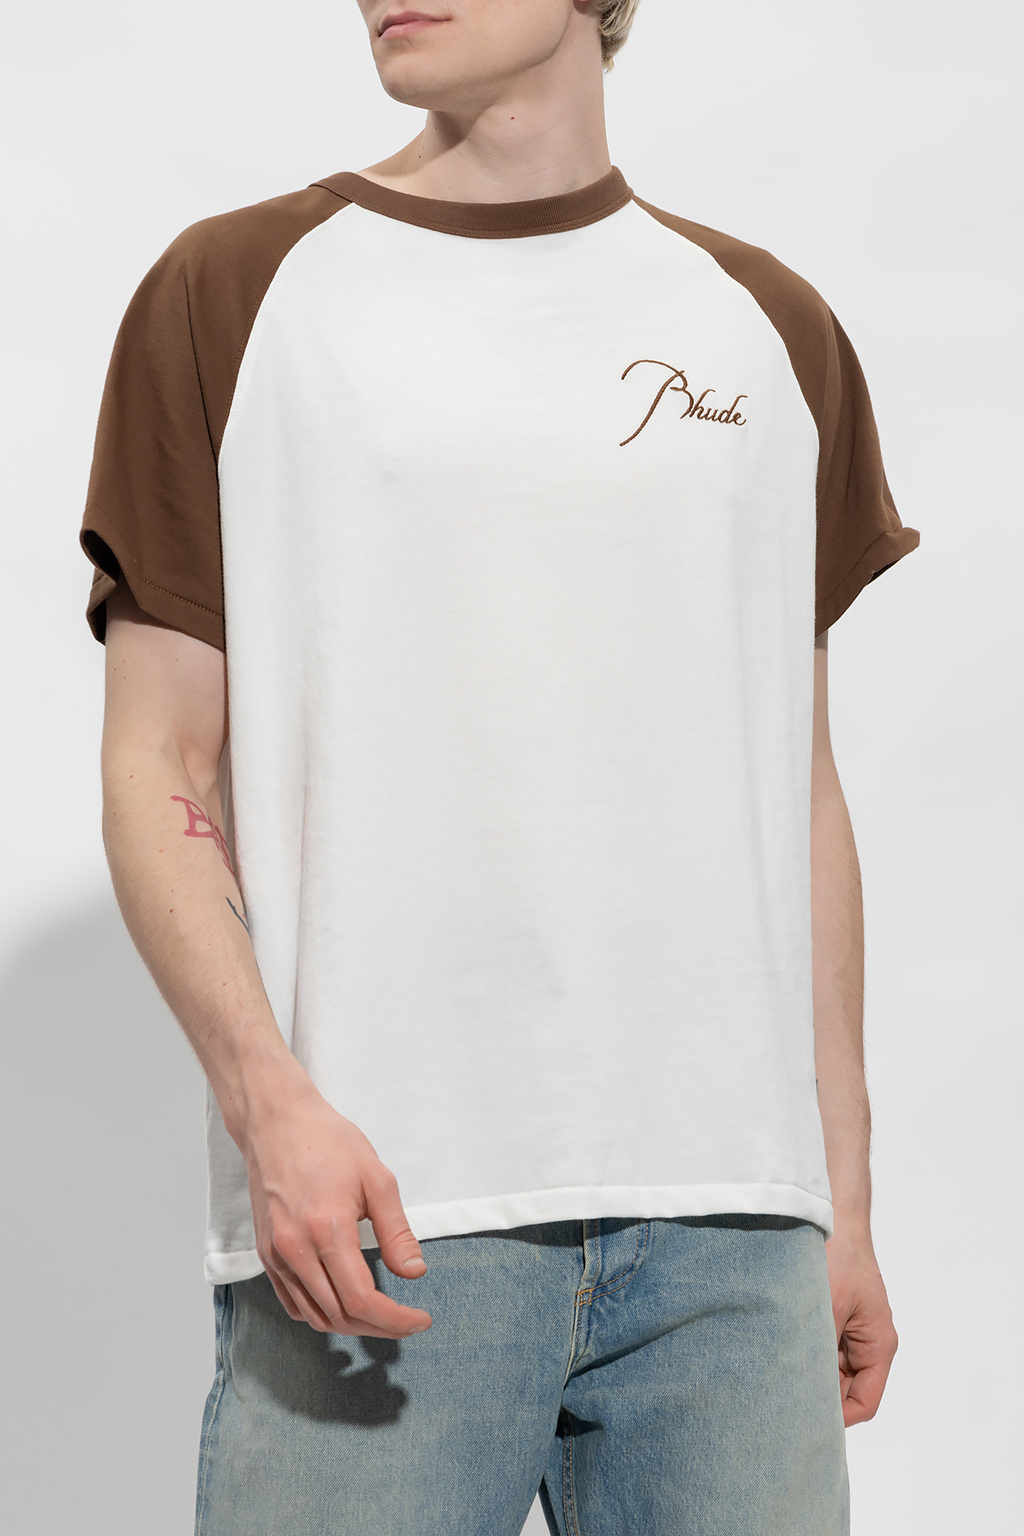 Rhude A-COLD-WALL short-sleeve boxy fit shirt